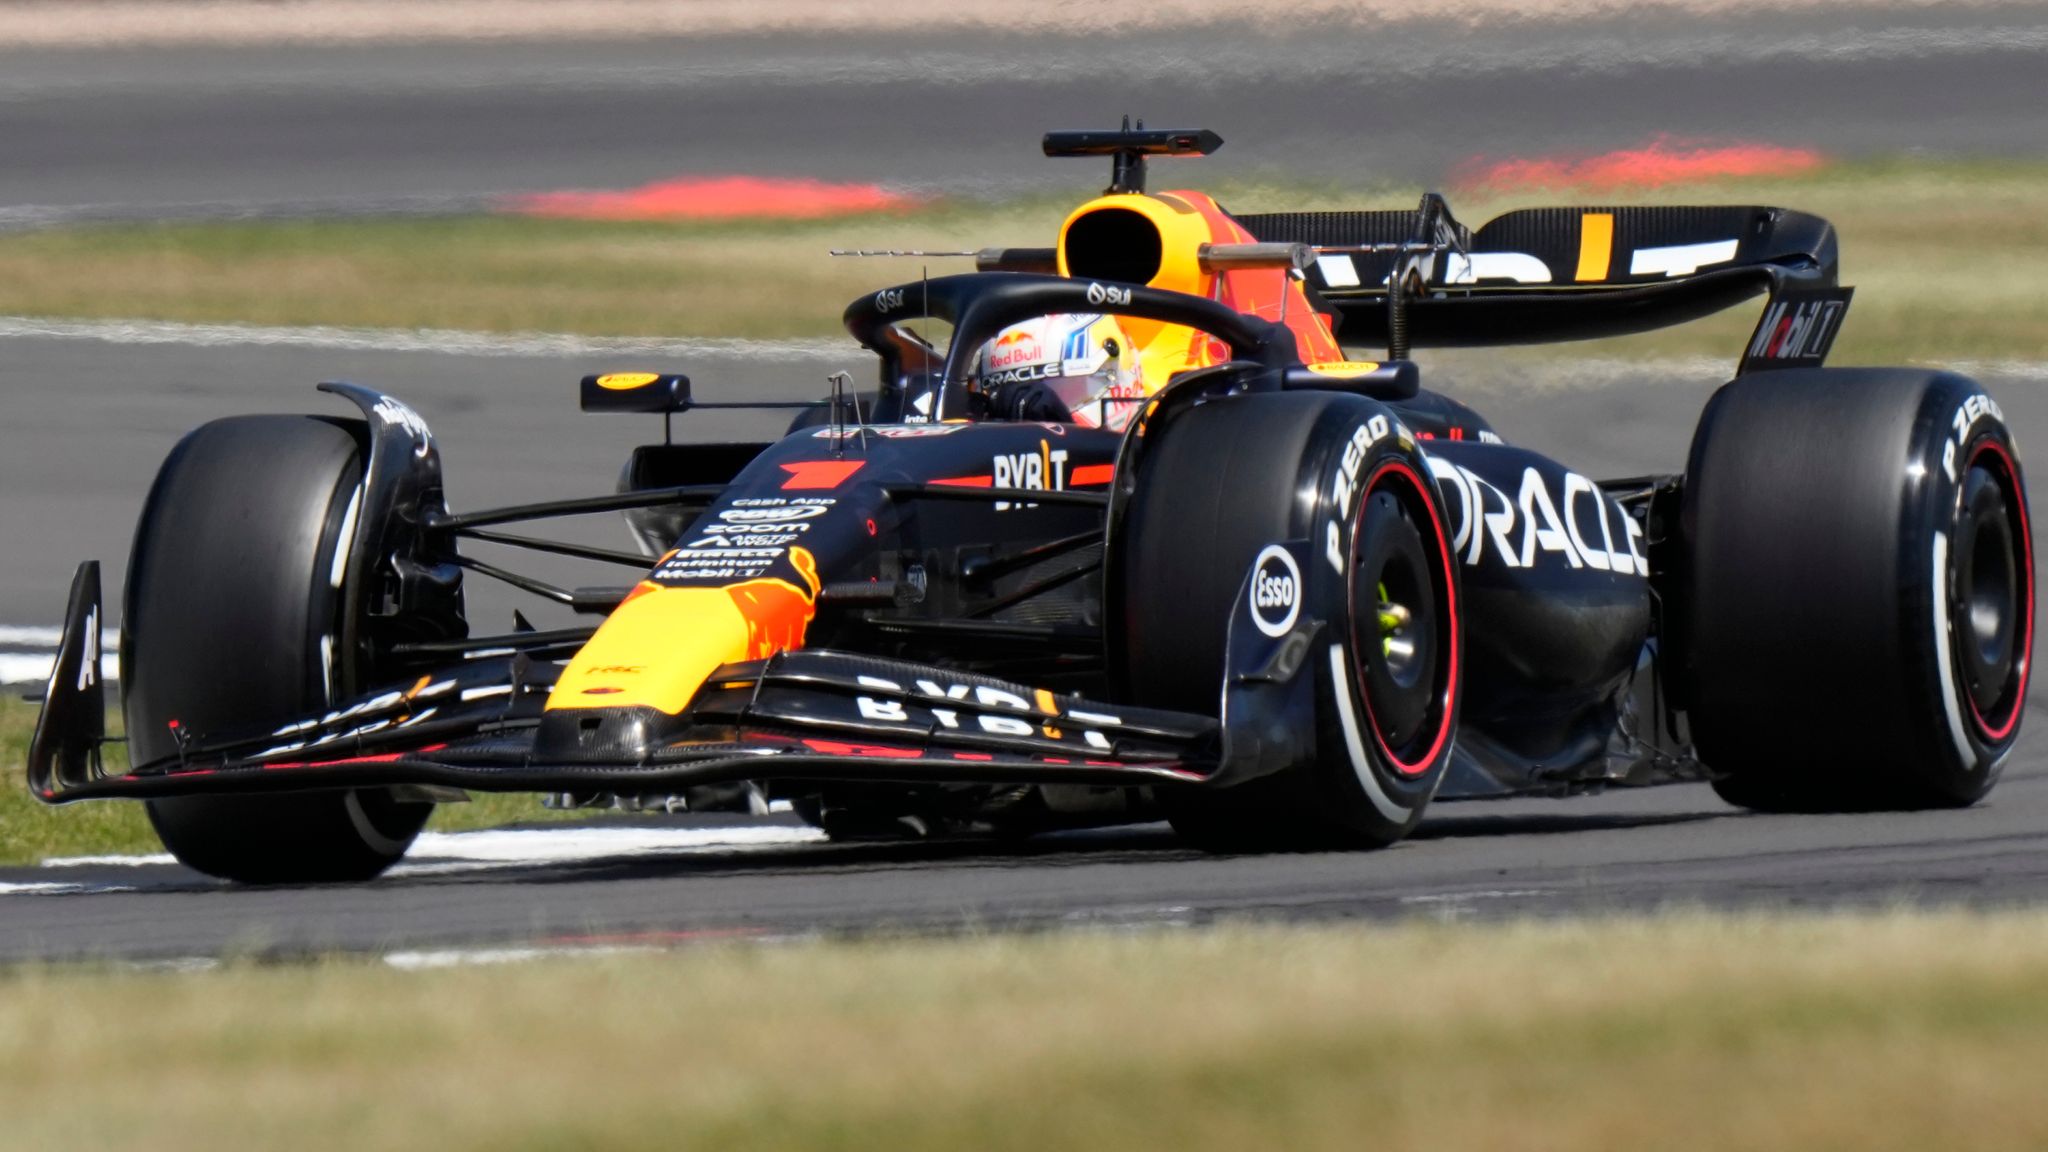 British GP, Practice One Max Verstappen leads Red Bull one-two with Alex Albon an impressive third for Williams F1 News